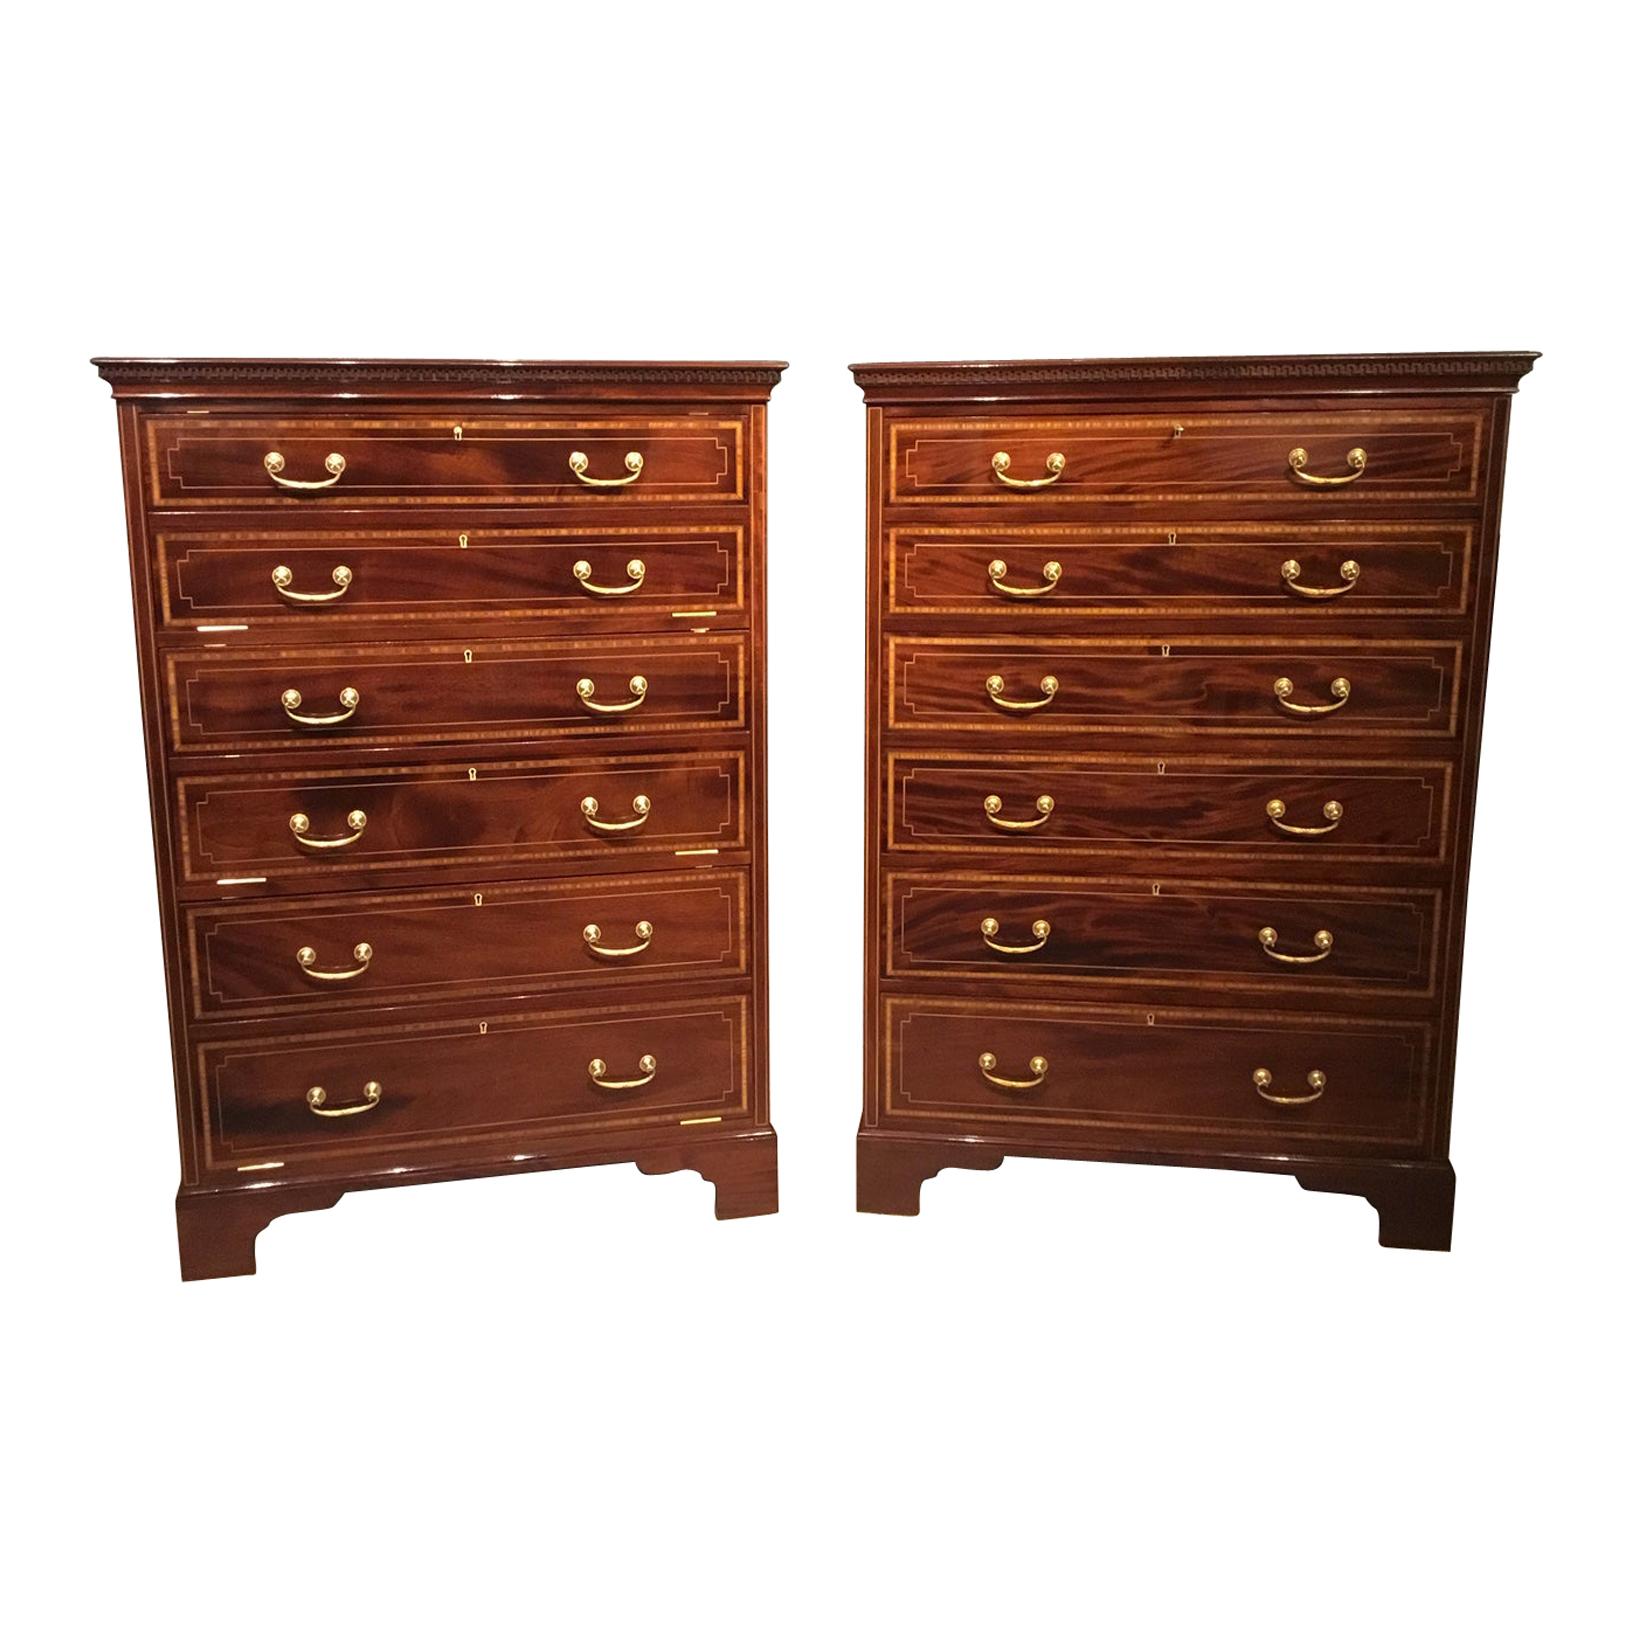 Superb Quality Pair of Edwardian Period Mahogany Inlaid Chests For Sale